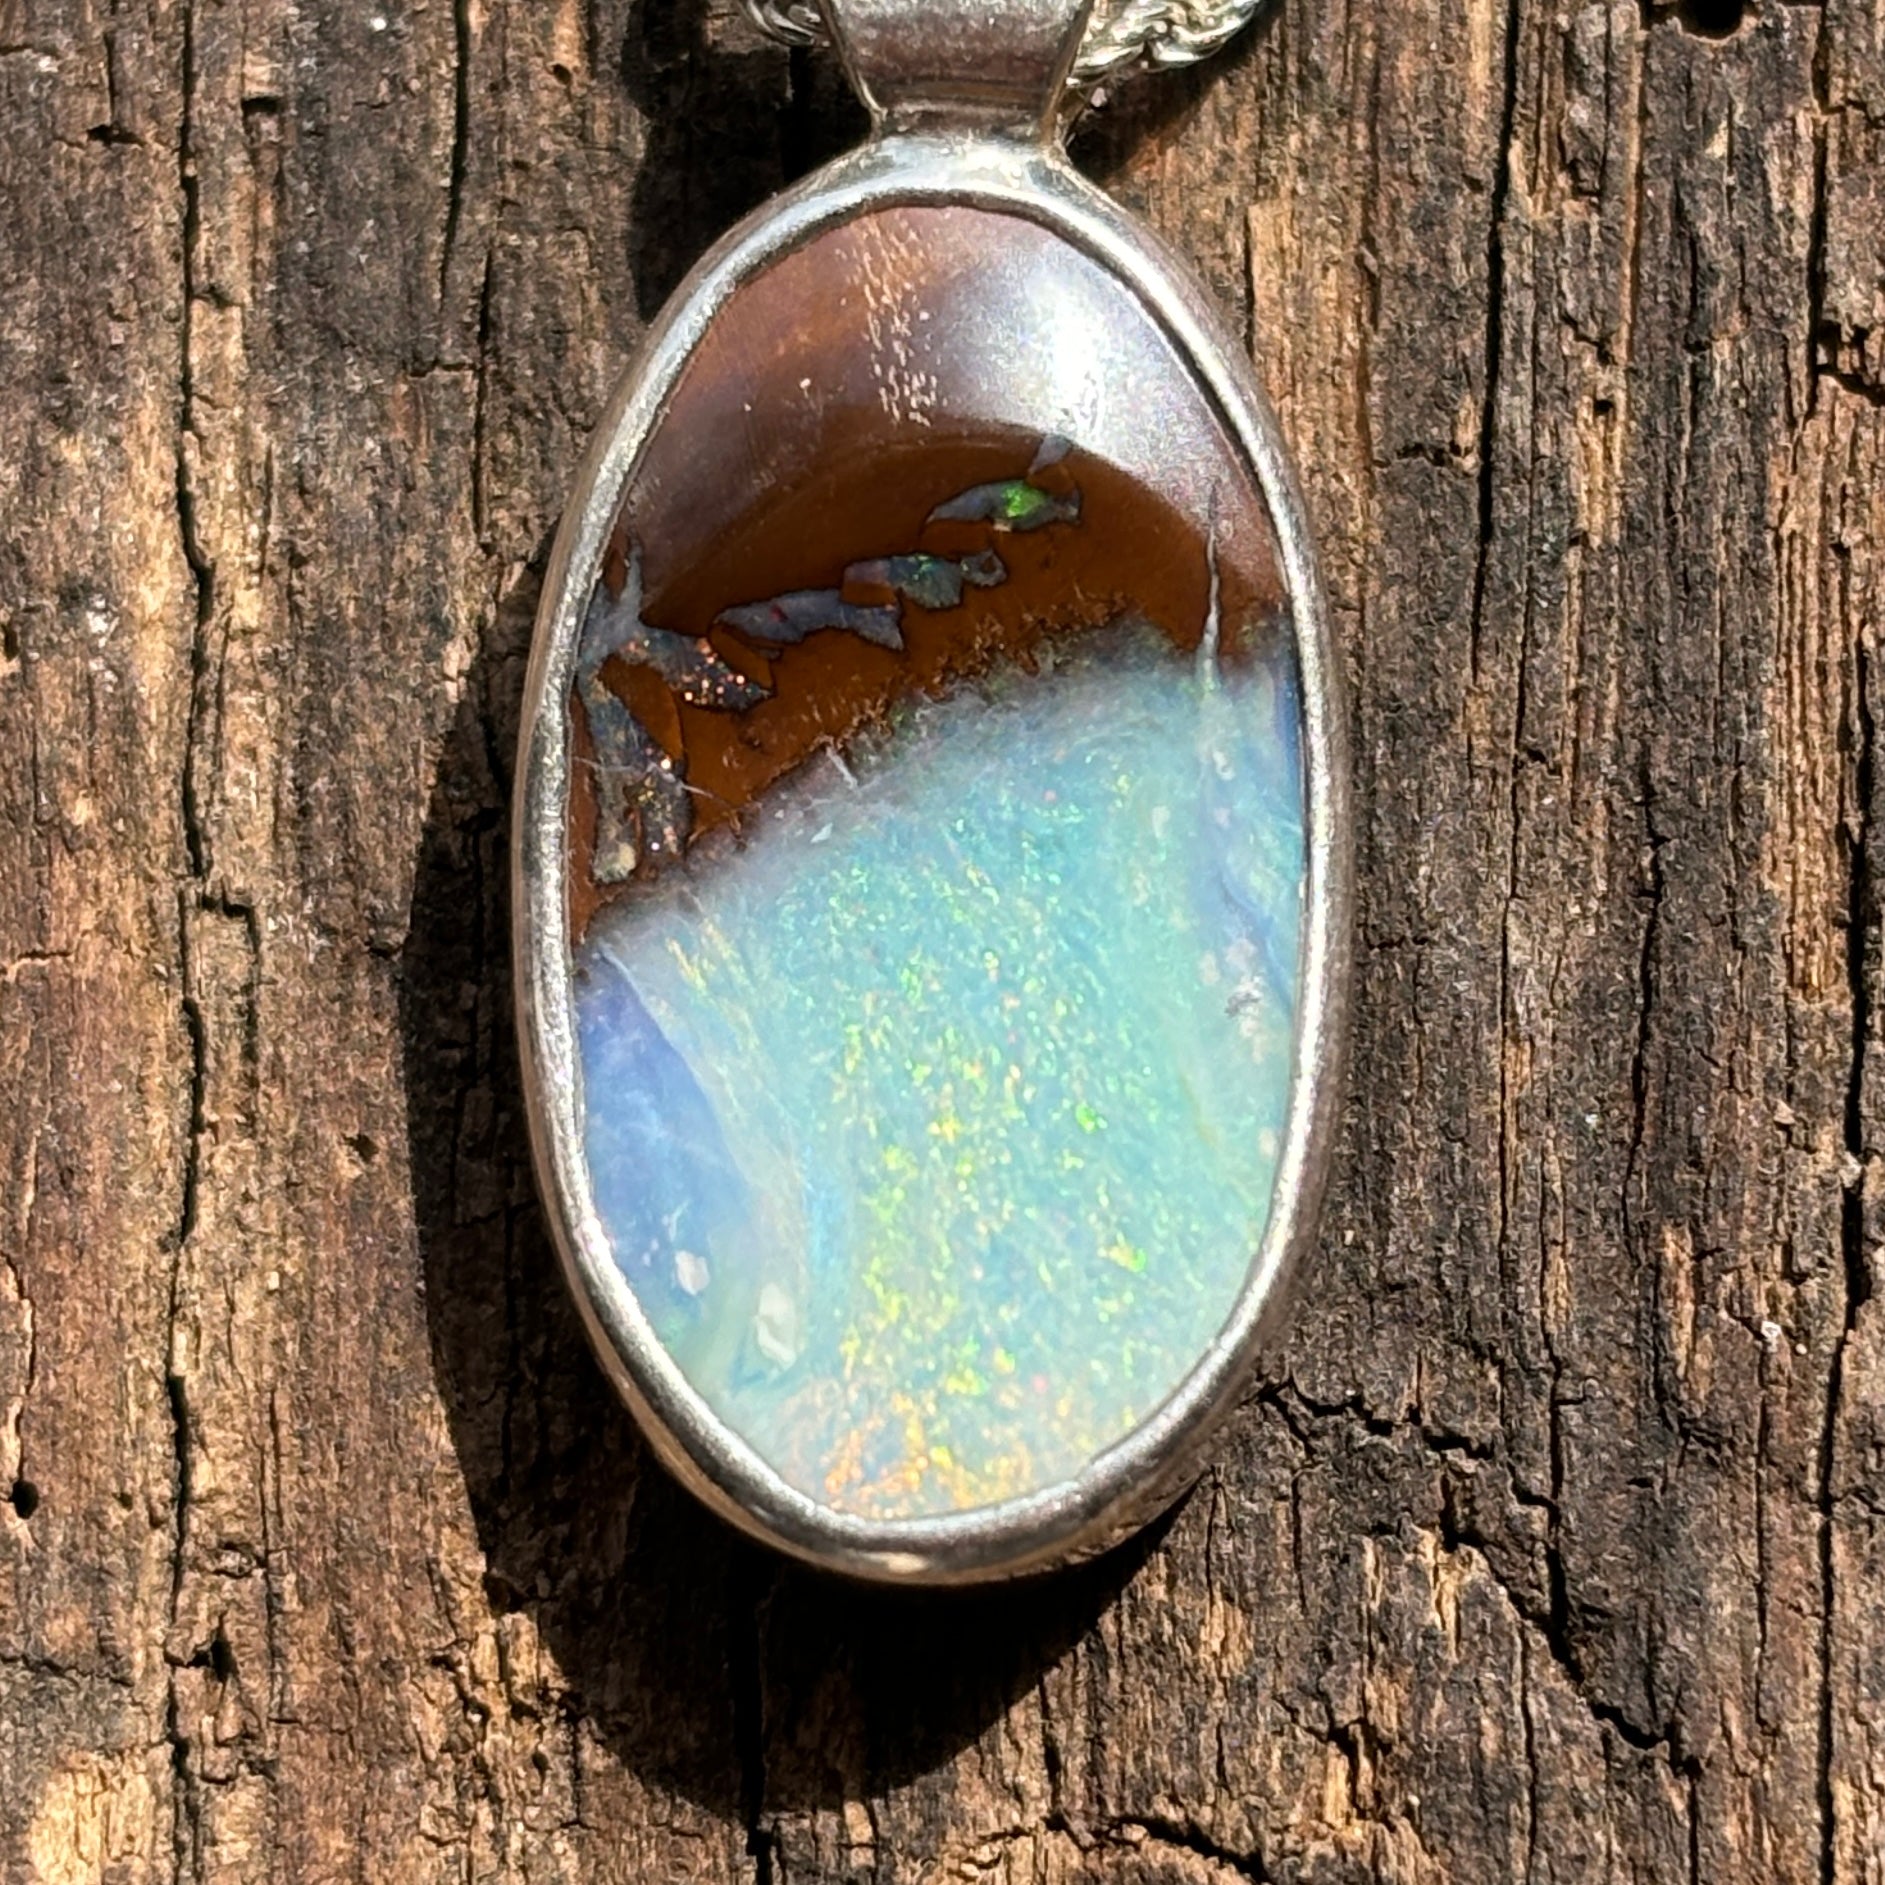 You Can Have Both Australian Boulder Opal Necklace